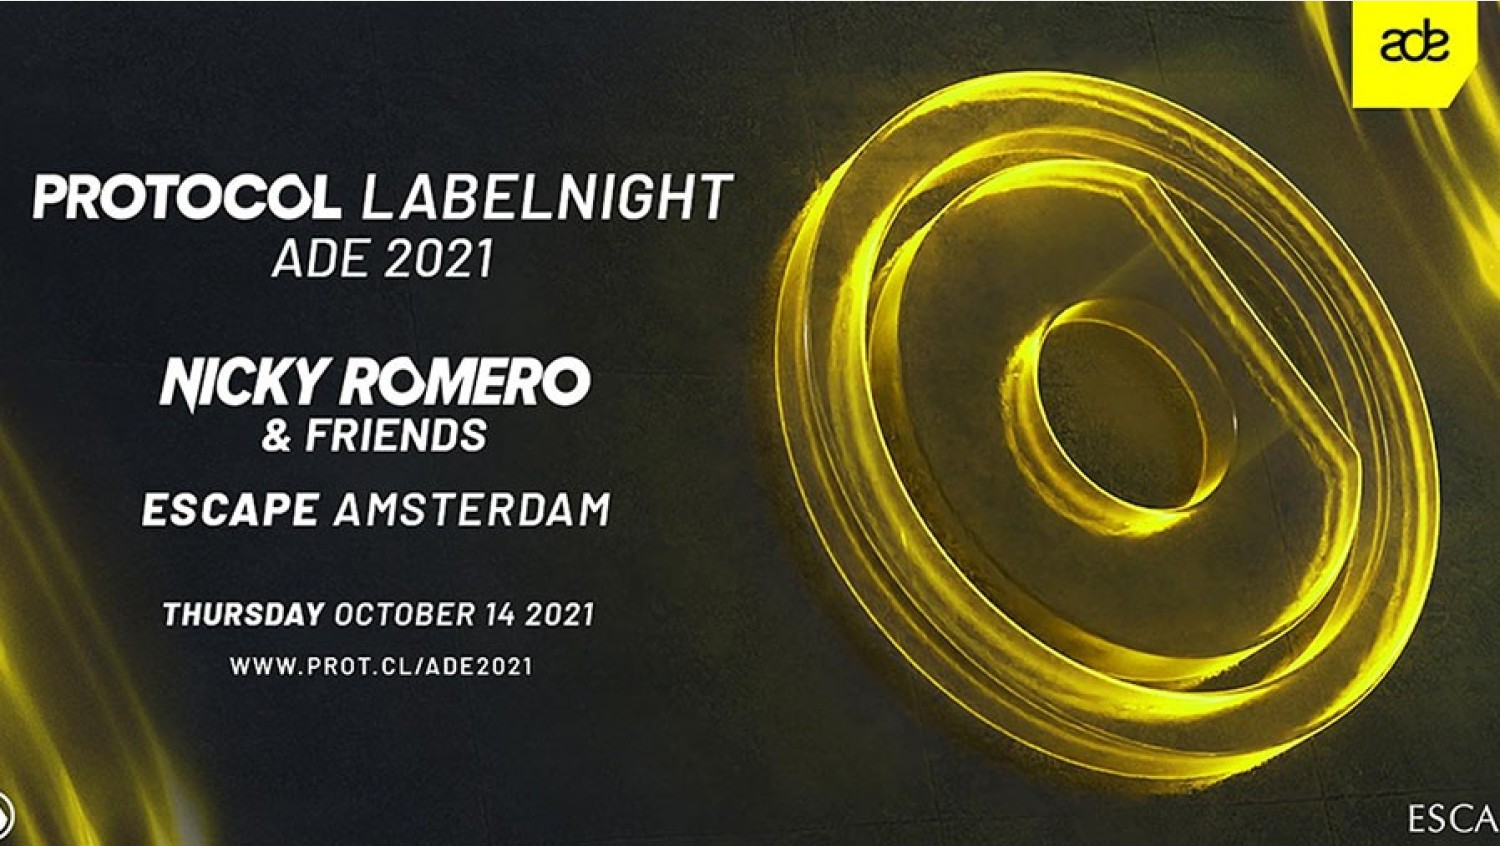 Party nieuws: Protocol Labelnight ADE 2021 maakt line-up bekend